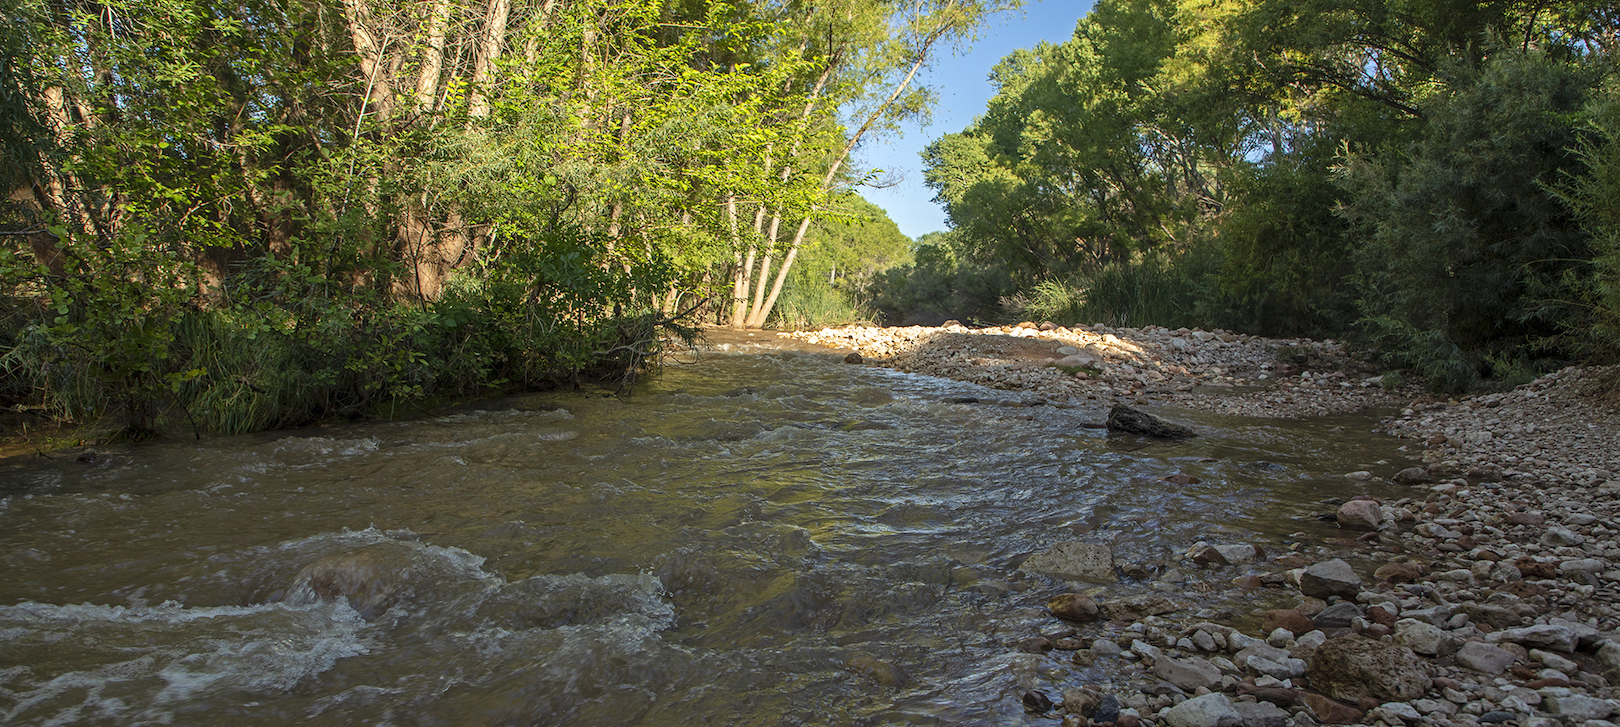 A lush view of the flowing Verde River, with trees on one side and a rocky beach on the other